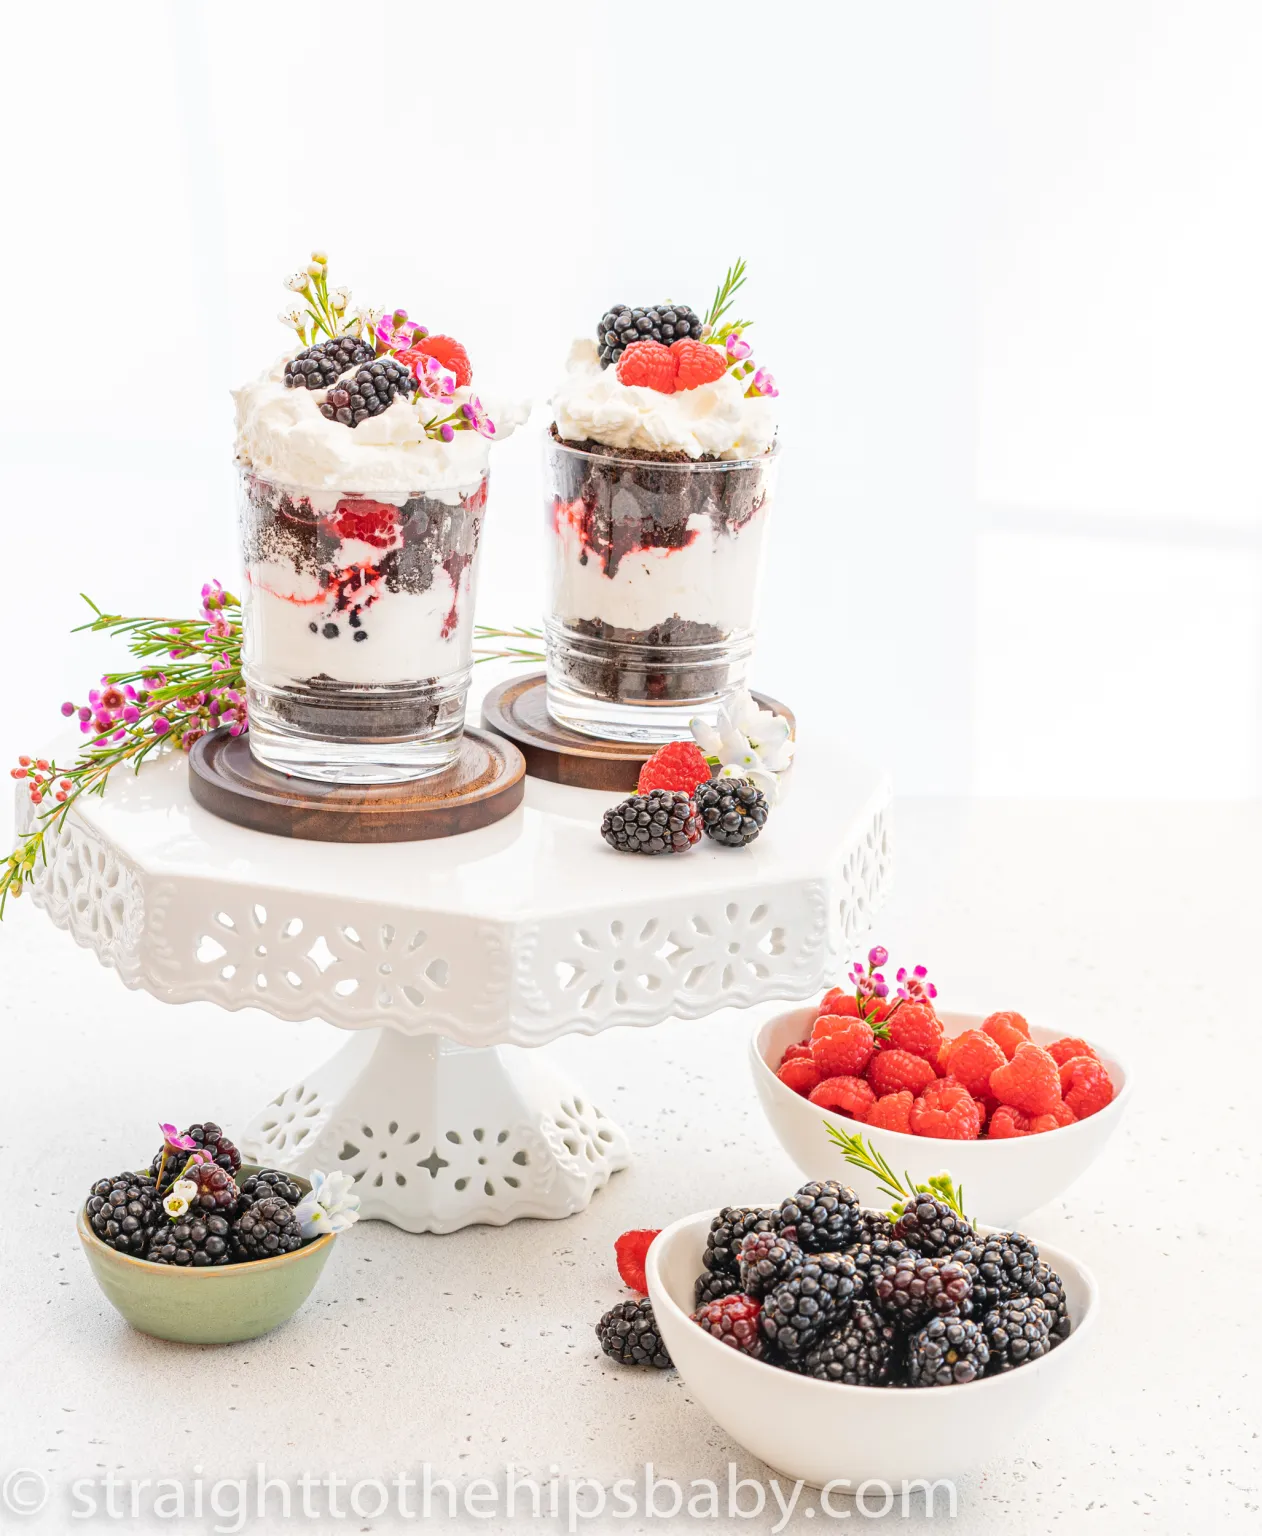 Layered trifles, served with fresh berries on a white cake stand